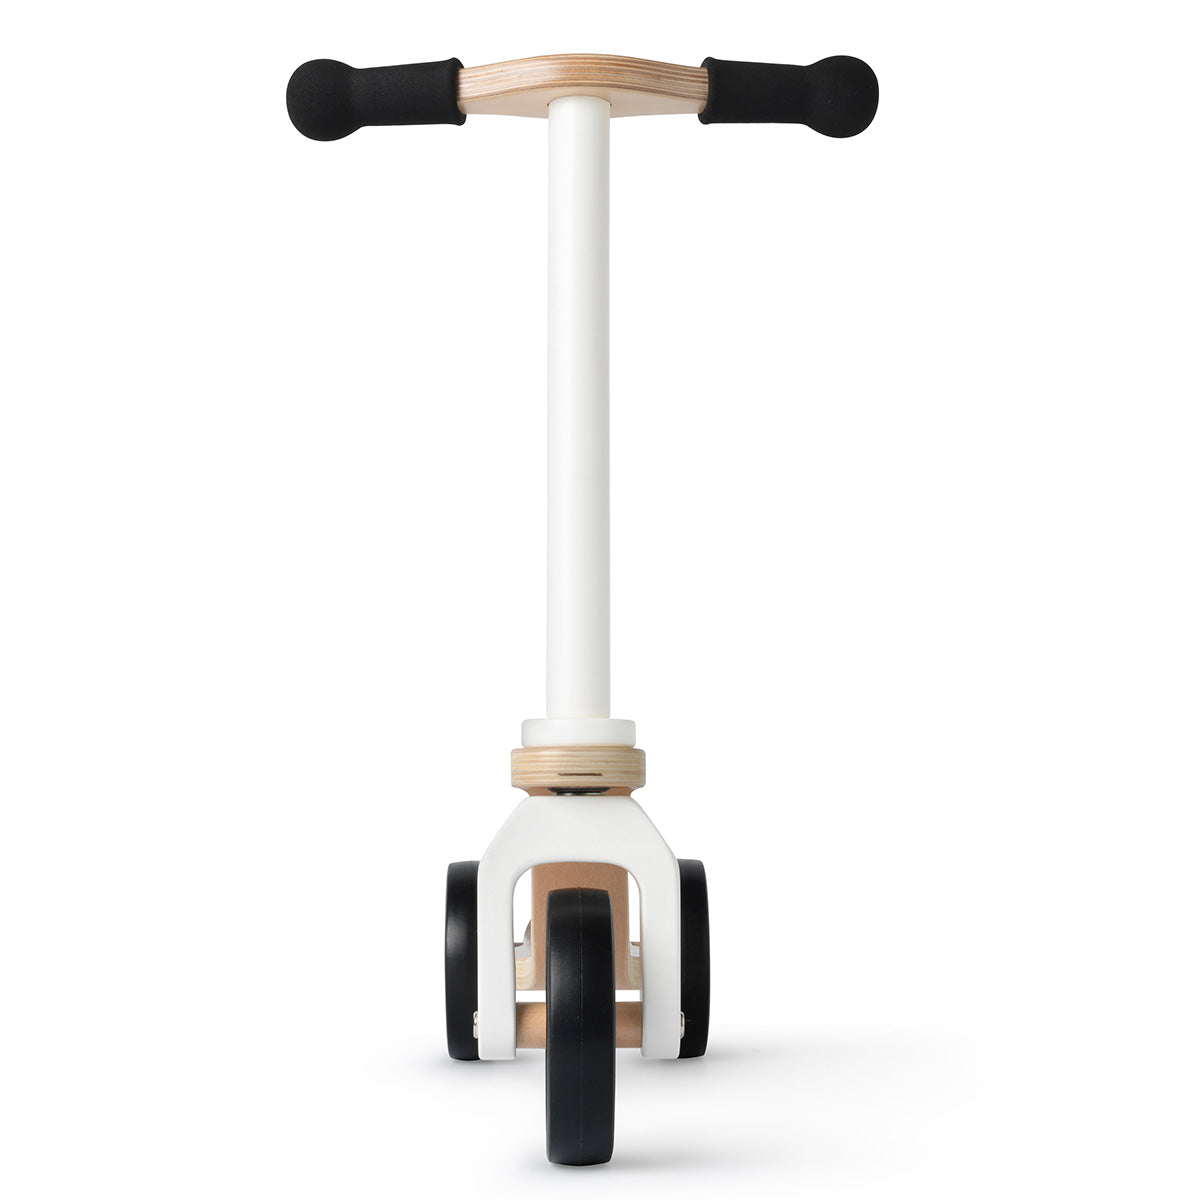 Load image into Gallery viewer, Kinder Scooter | Natural
